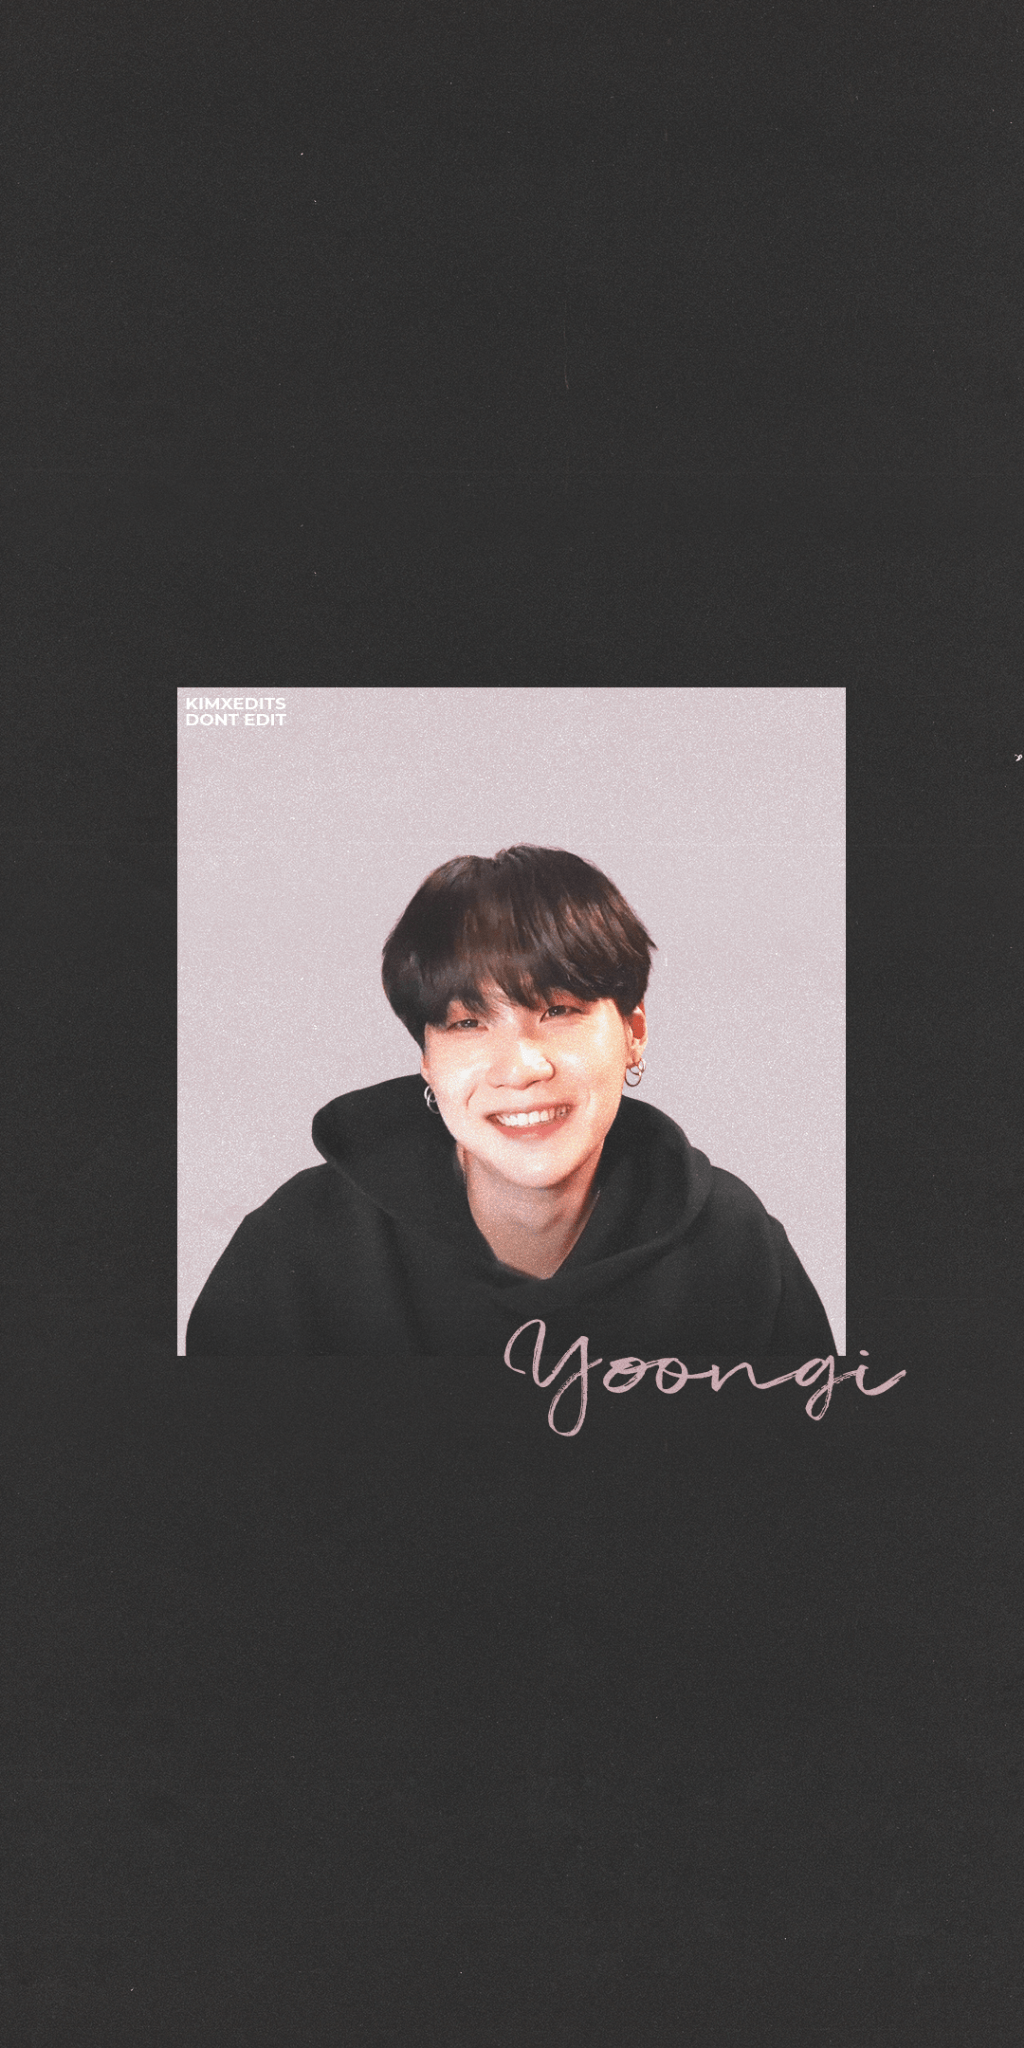 BTS WALLPAPERS! If you want a wallpaper of your bias just comment down below! - Suga